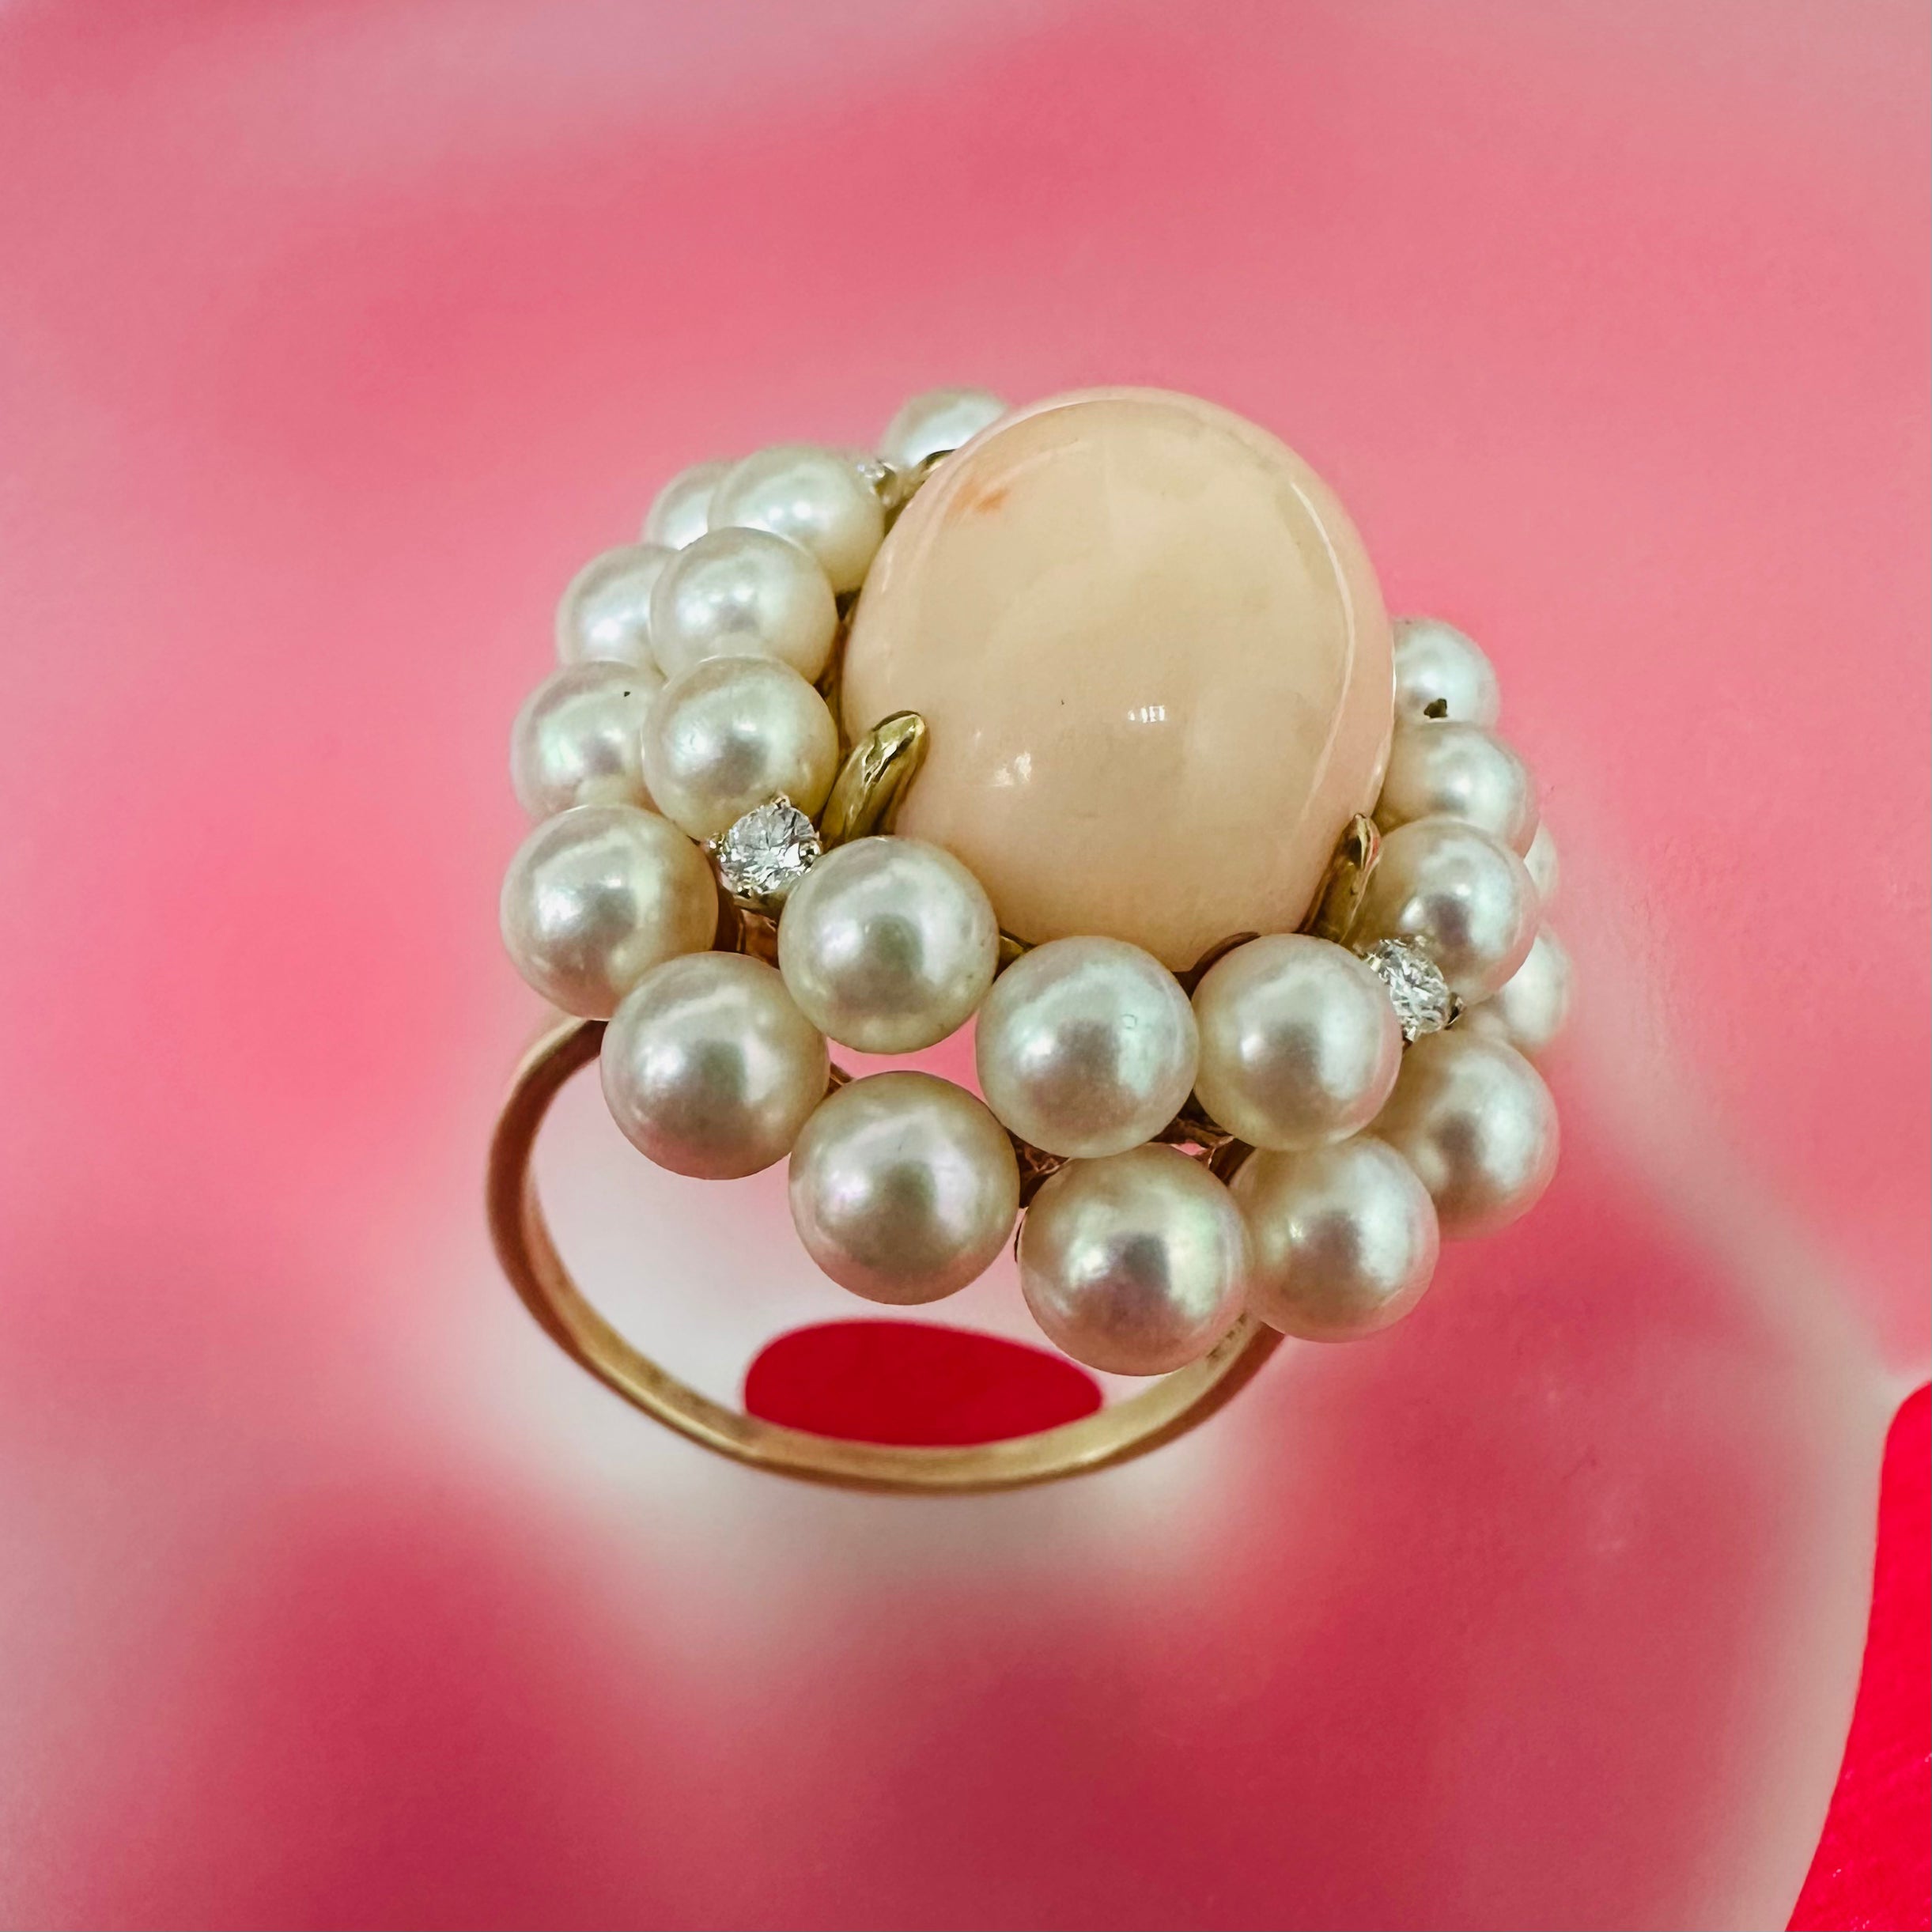 Magnificent Angelskin Coral Pearl and Diamond Halo Cocktail Ring